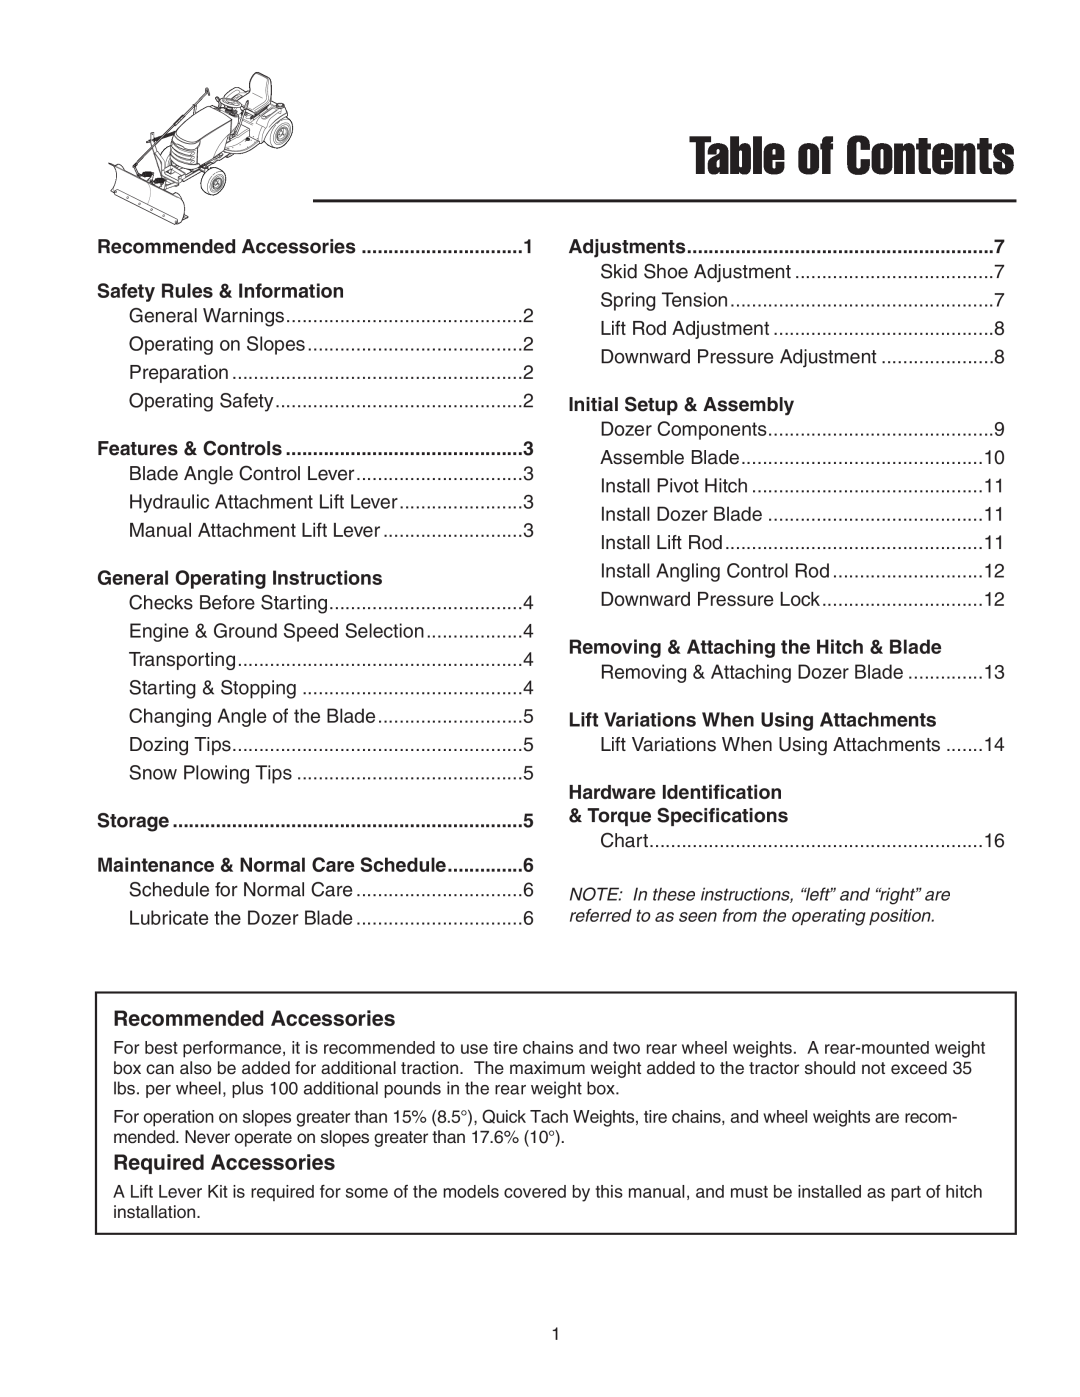 Snapper 1723445-02 Recommended Accessories, Required Accessories, Safety Rules & Information, Storage, Table of Contents 